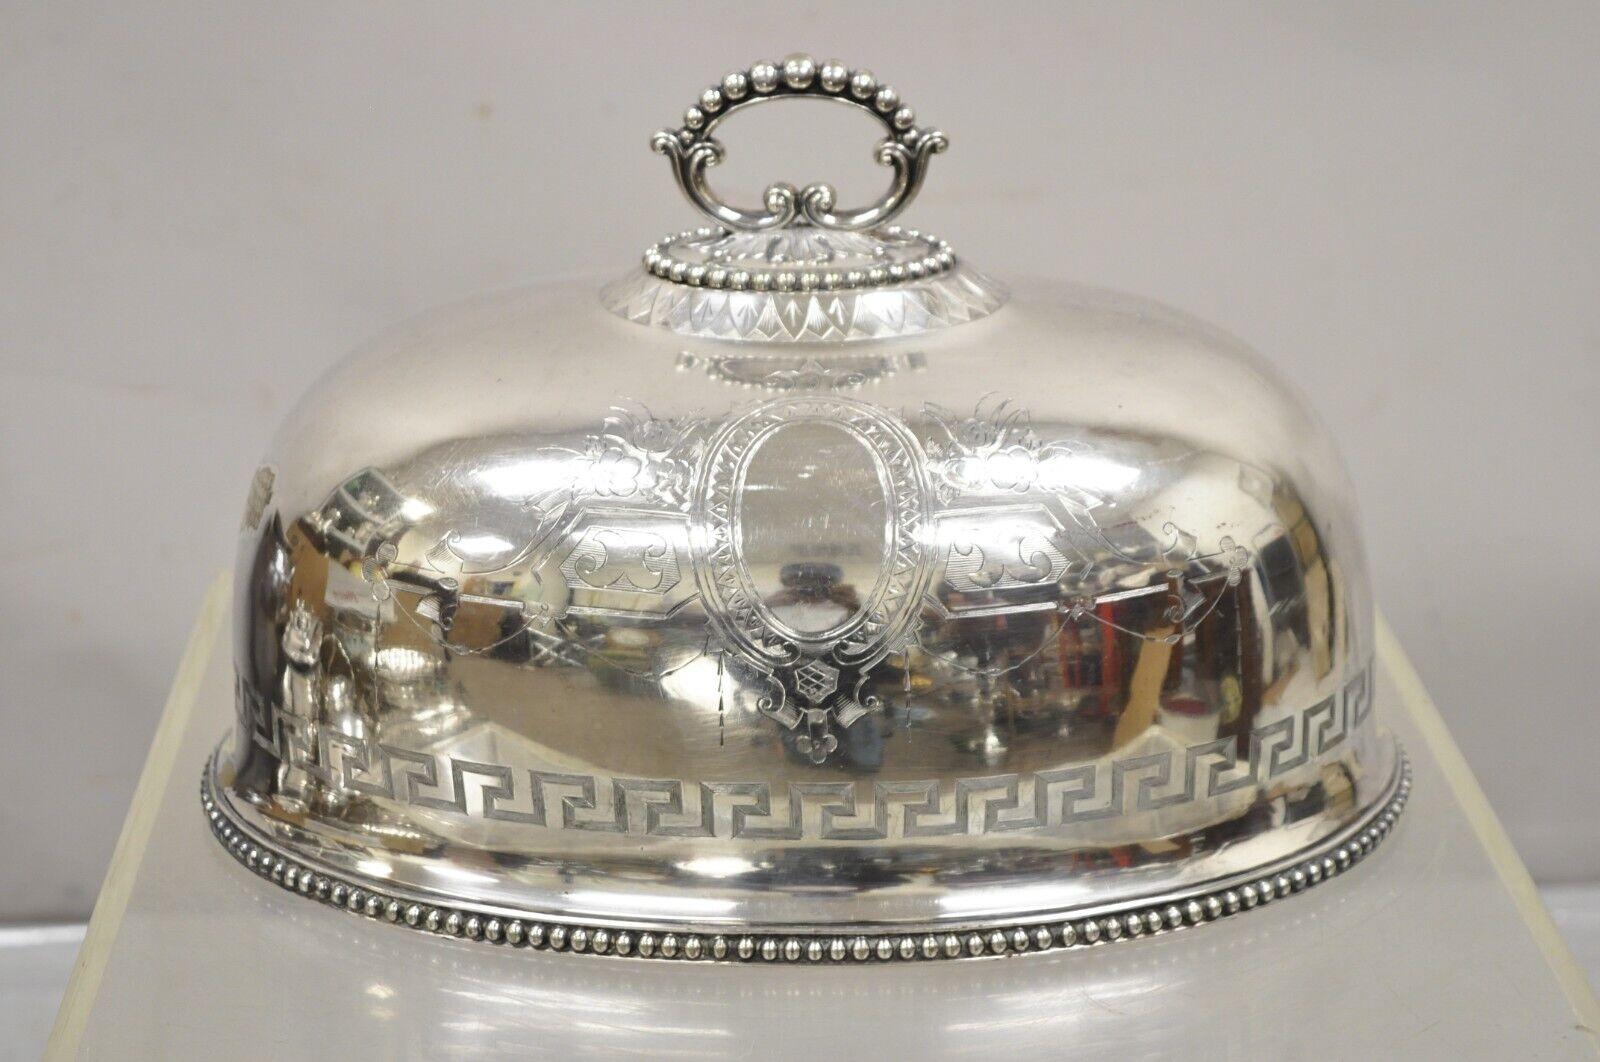 A.B. Savory & Sons Sheffield England Regency Greek Key Silver Plated Dome Cover. Item features an ornate handle, floral shield and drape engraving, Greek key and beaded border, original hallmark, very nice antique. Circa 1900. Measurements:  9